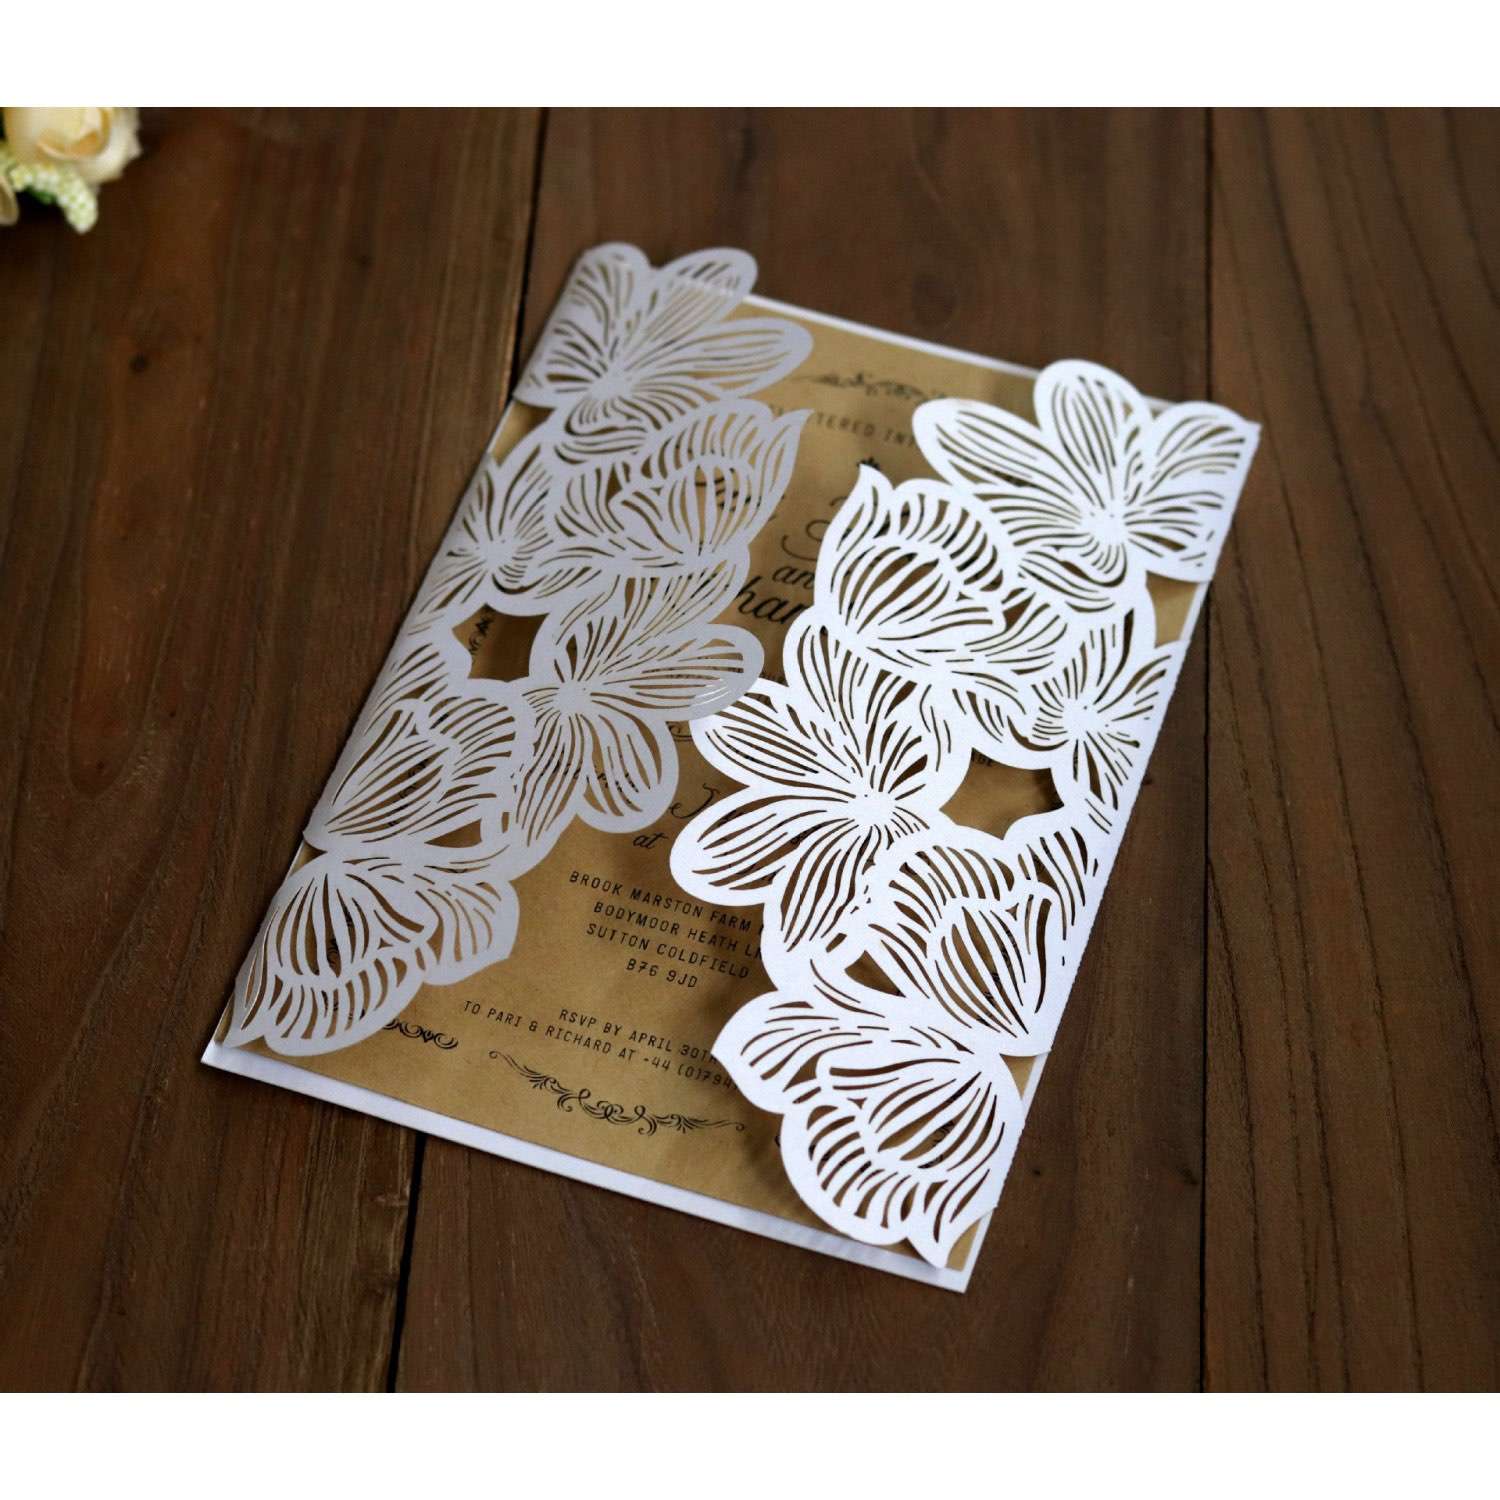 Laser Rose Invitation Card Thank You Card  Holiday Greeting Card 2020 Wholesale 